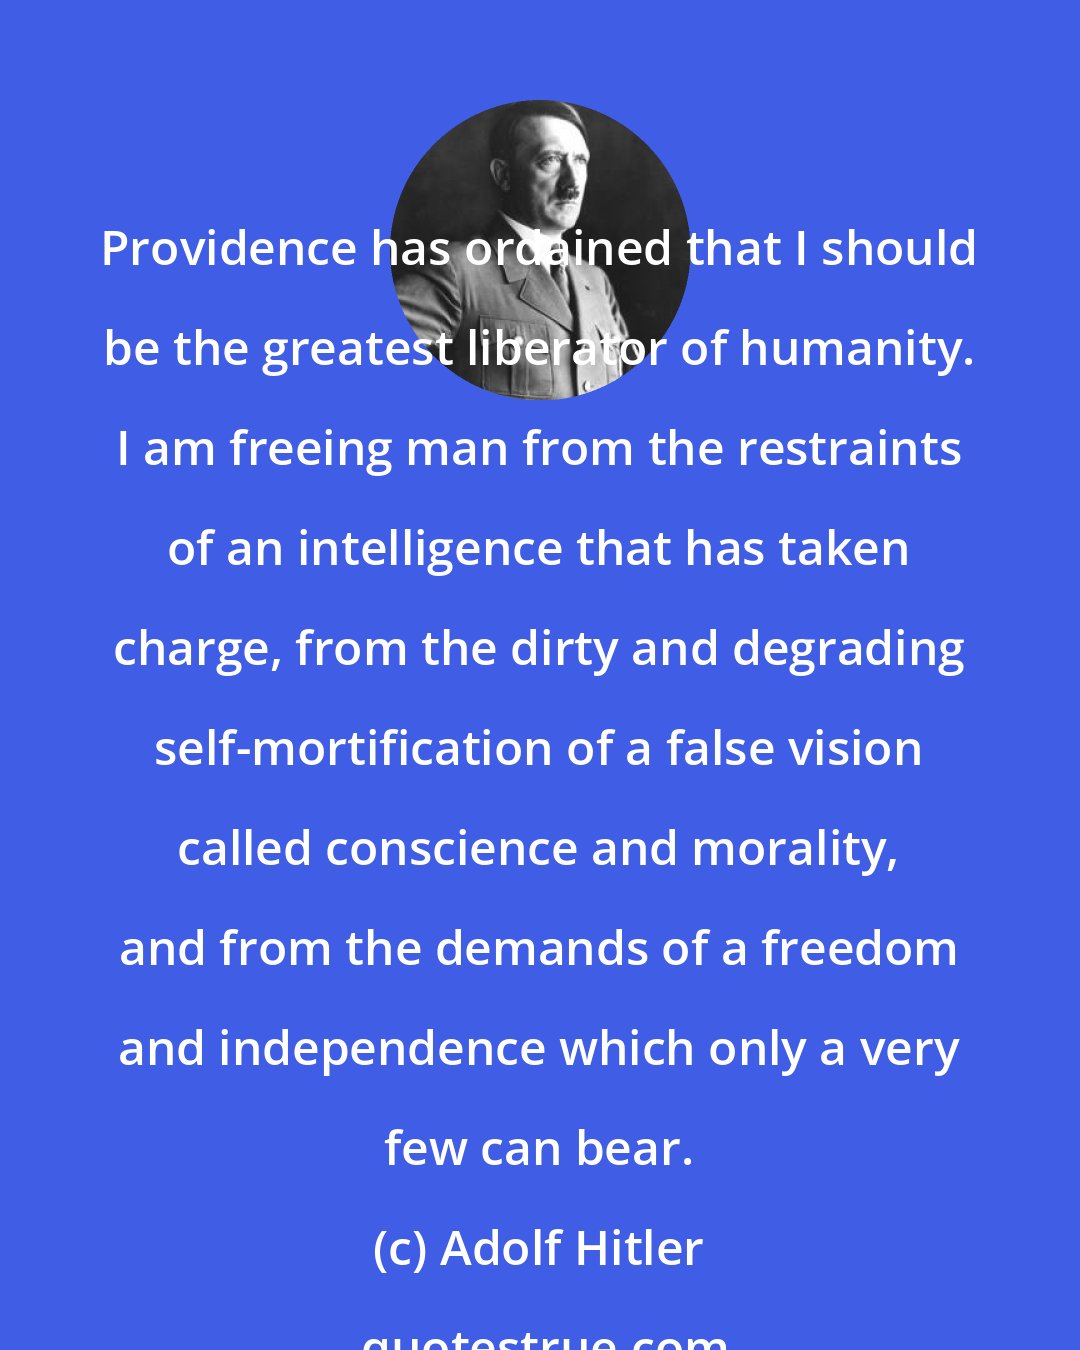 Adolf Hitler: Providence has ordained that I should be the greatest liberator of humanity. I am freeing man from the restraints of an intelligence that has taken charge, from the dirty and degrading self-mortification of a false vision called conscience and morality, and from the demands of a freedom and independence which only a very few can bear.